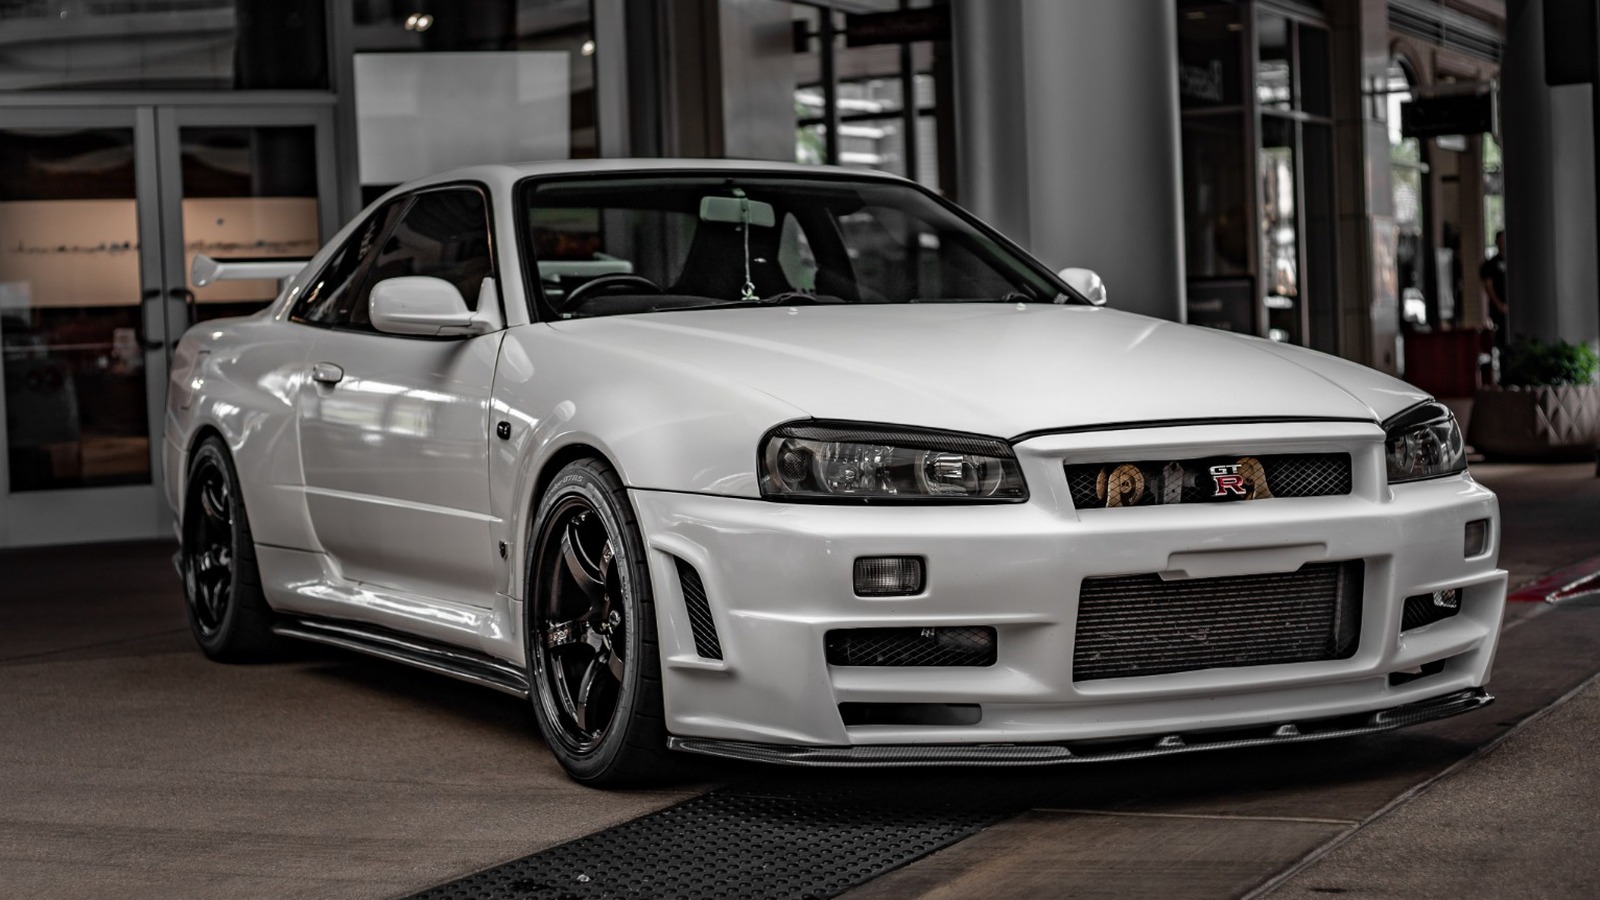 U.S.-Legal Nissan Skyline R34 GT-R is a Crazy Rare Limited Edition and It's  for Sale